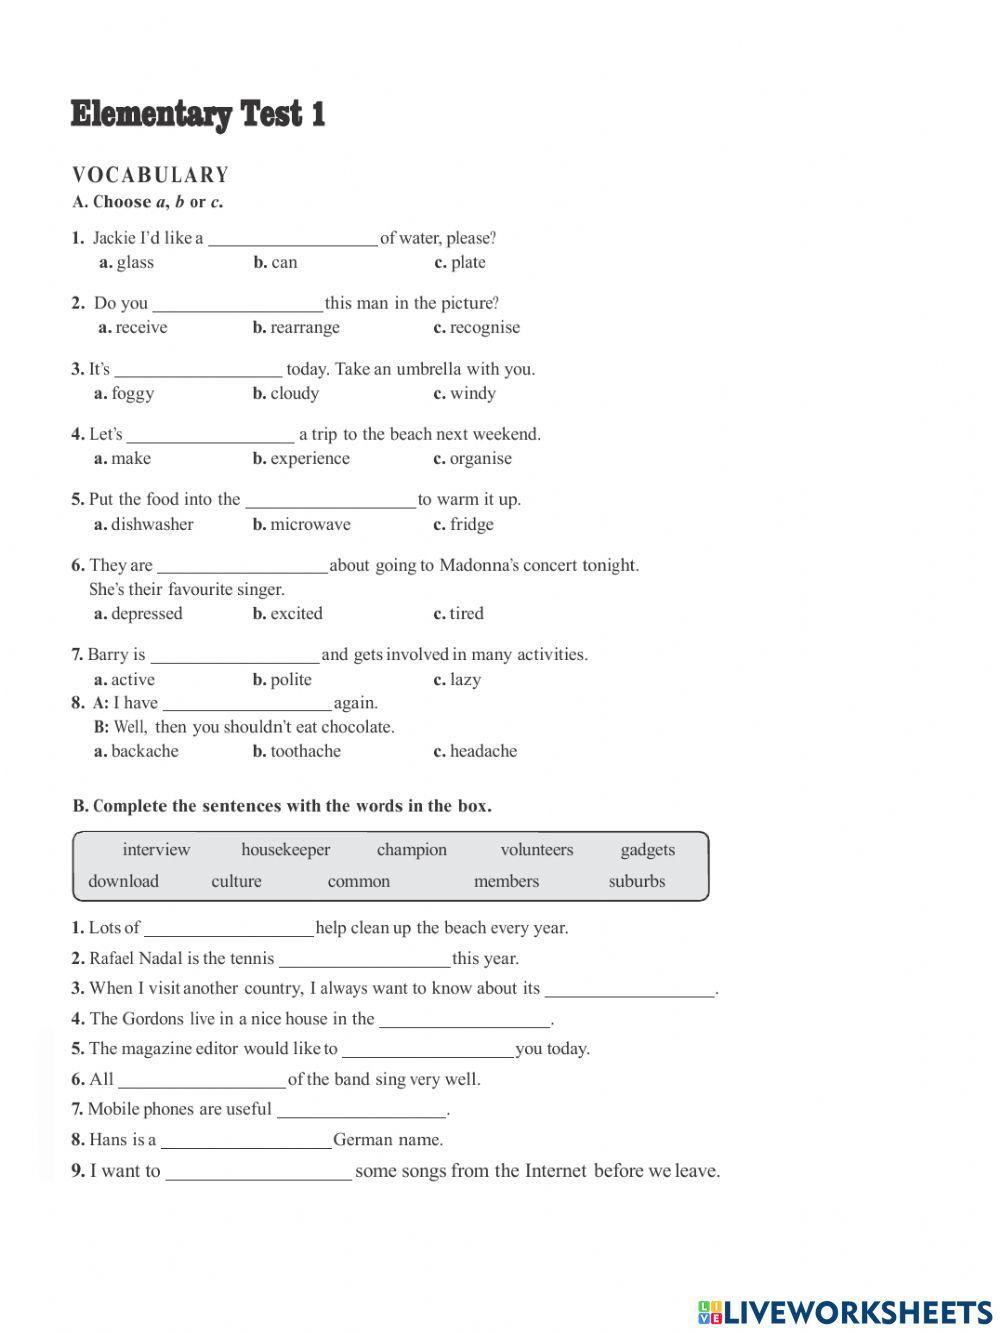 Elementary Test A1